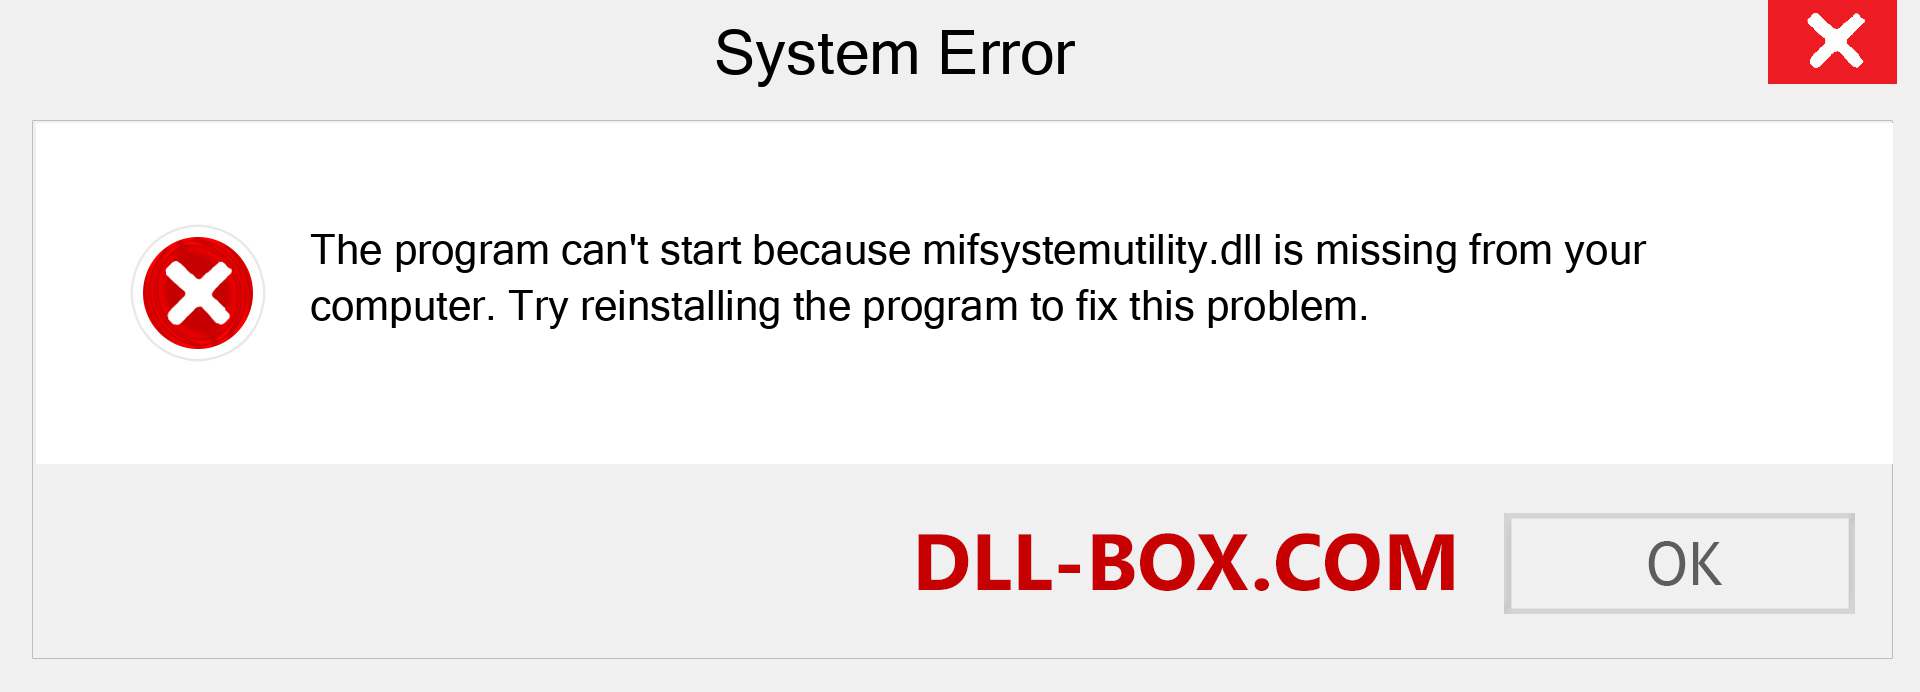  mifsystemutility.dll file is missing?. Download for Windows 7, 8, 10 - Fix  mifsystemutility dll Missing Error on Windows, photos, images